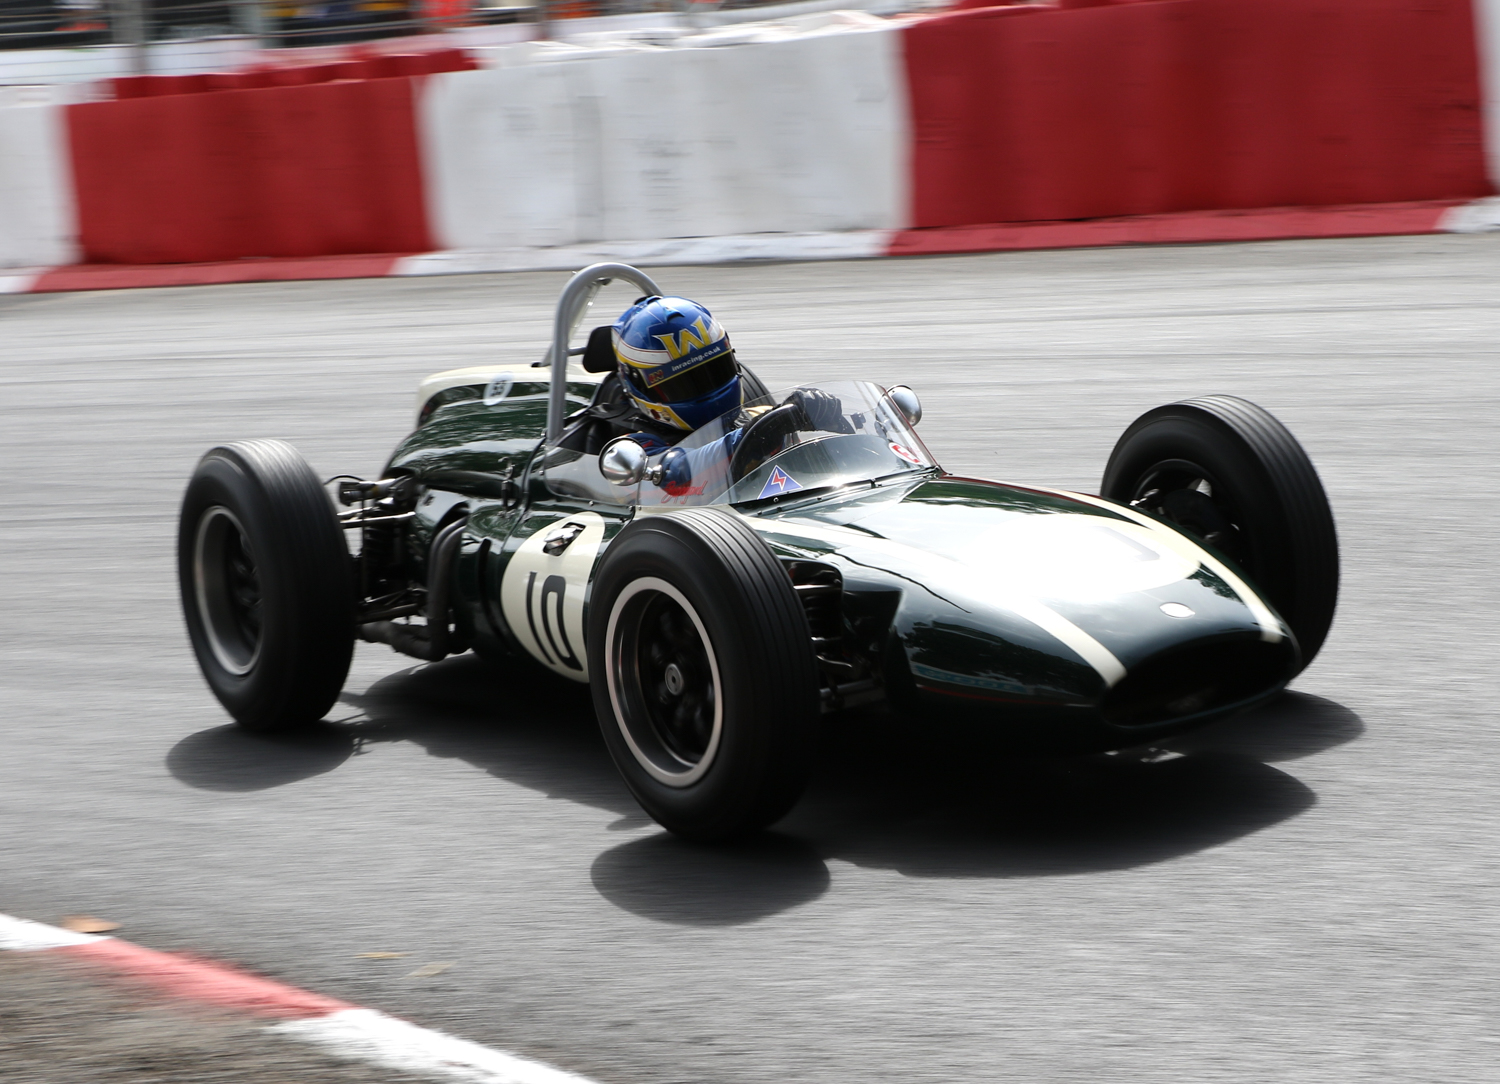 WILL NUTHALL DID JACK BRABHAM PROUD IN HIS WINNING COOPER T53. Picasa